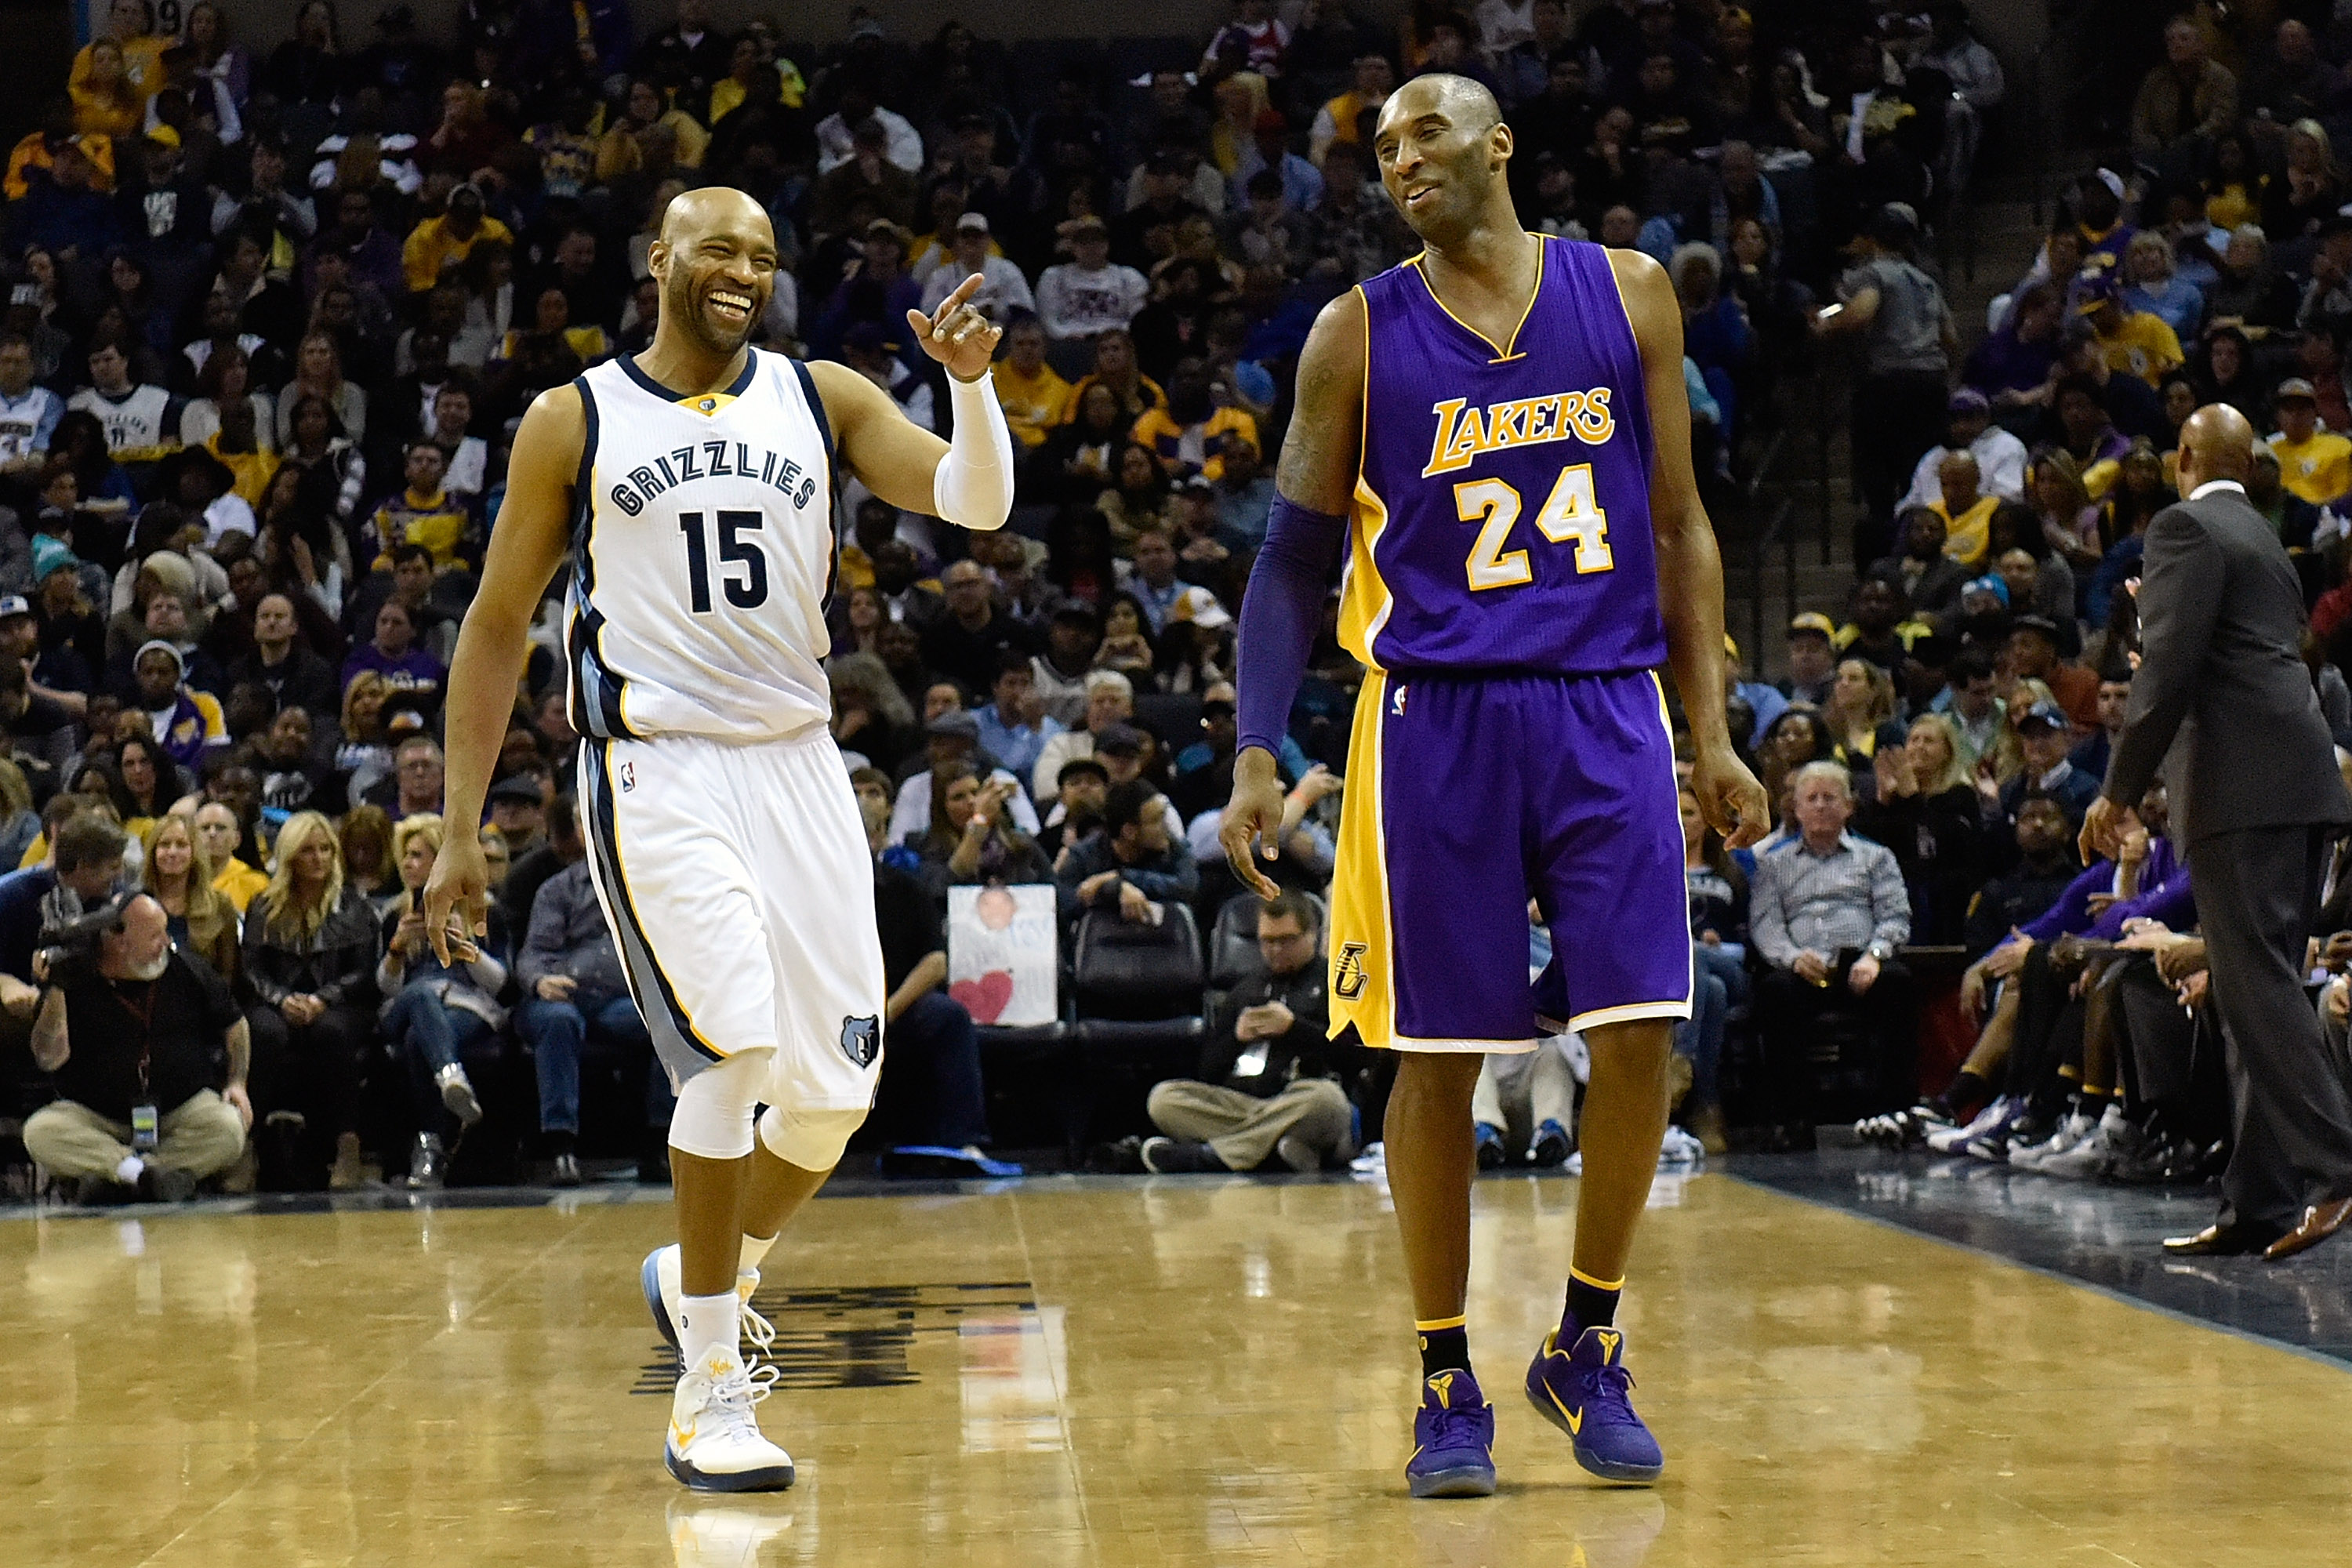 Kobe Bryant and Vince Carter share a laugh during a game between the Los Angeles Lakers and Memphis Grizzlies in February 2016